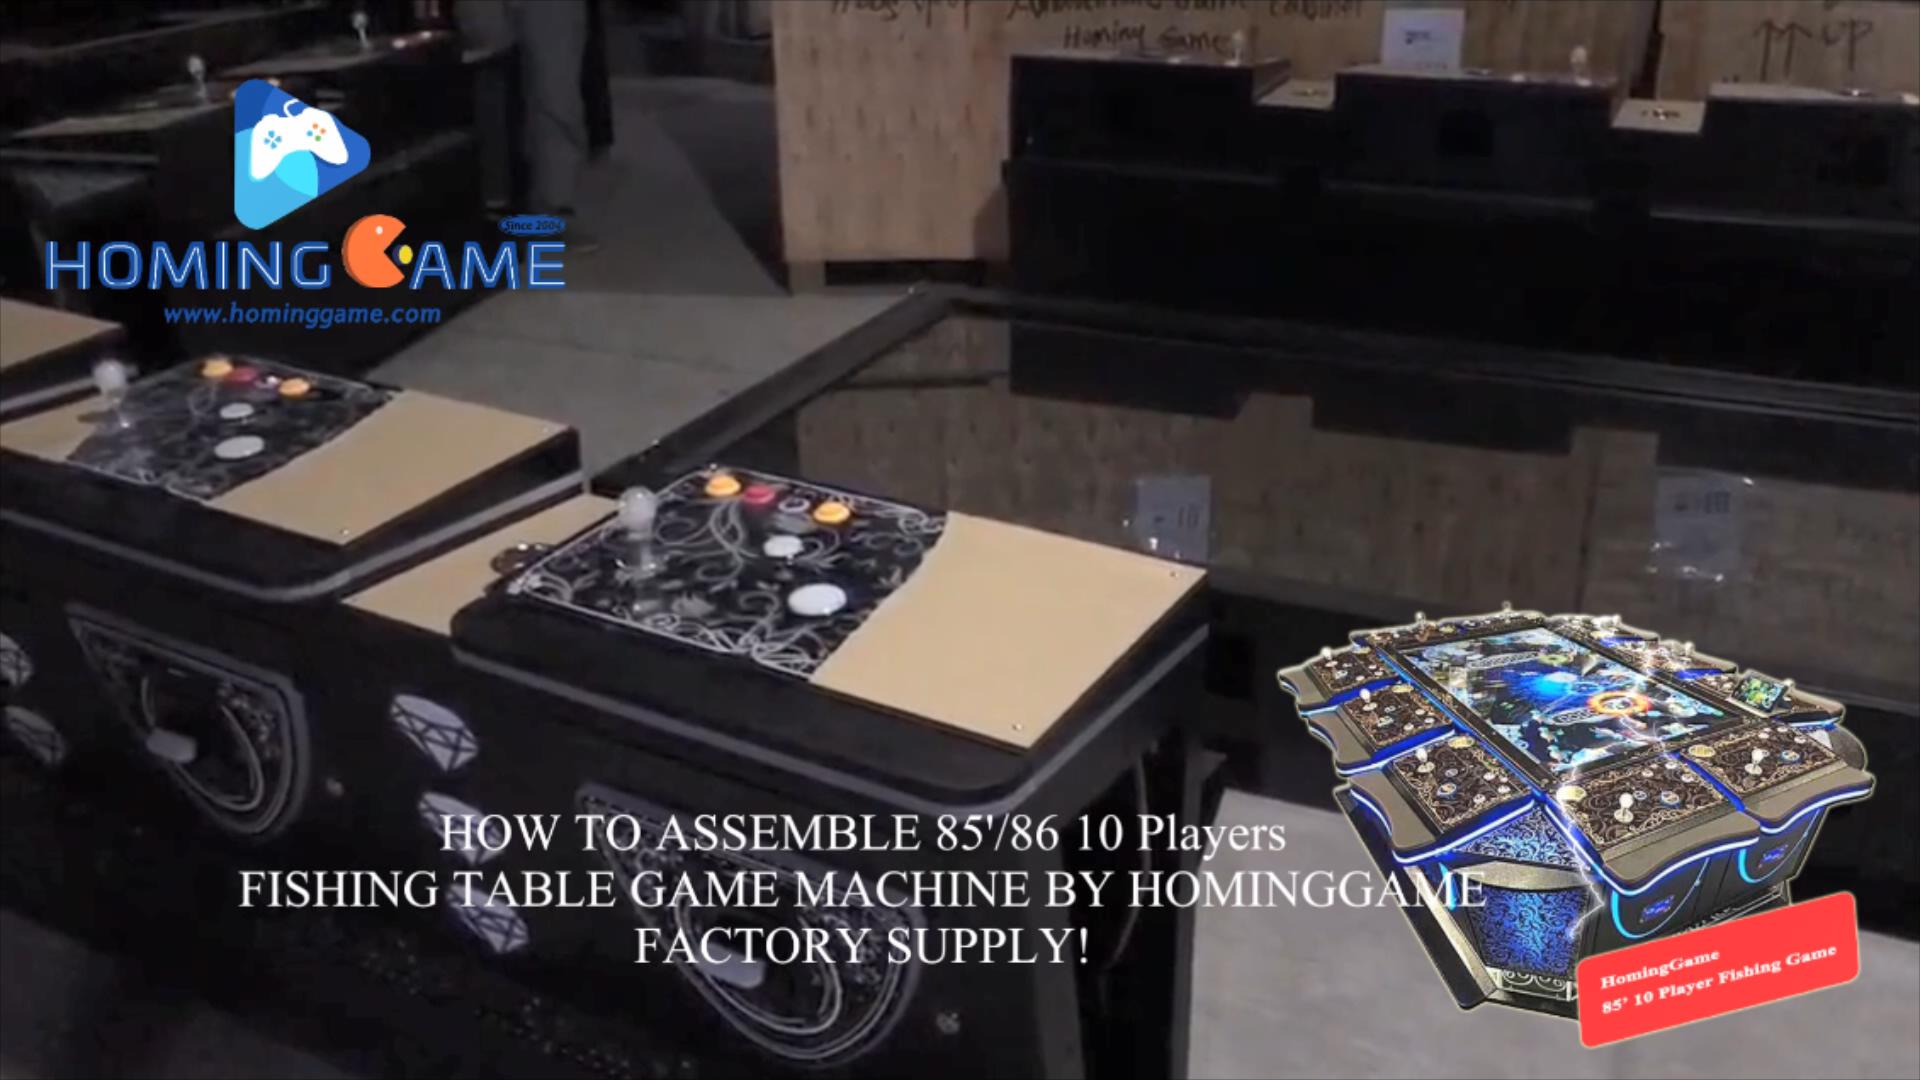 How To Assemble 85 86 Large Screen 10 Players Fishing Table Game Machine Hot Fishing Game In USA By HomingGame Factory Supply !!(Order Call Whatsapp:+8618688409495- Sales@hominggame.com),85‘ 10 players fishing table game machine,85' large screen 10 player fishing game machine,85' screen 10 player fishing game machine,85' screen fishing game machine,85' fishing table game machine,10 player fishing game machine,10 player fishing table game machine,fishing game,fishing table game machine,fishing game machine,ocean king fishing game machine,ocean king 3 fishing game machine,ocean king 3 monster awaken fishing game machine,ocean king 3 fire phoenix fishing game machine,dragon king fishing game machine,dragon hunter fishing game machine,ocean king 2 golden legend fishing game machine,ocean monster fishing game machine,kongfu panda fishing game machine,rampage fishing game machine,tiger strike fishing game machine,fire kylin fishing game machine,gaming machine,gambling machine,fish hunter fishing game machine,ocean monster fishing game,hominggame,www.gametube.hk,entertainment game machine,game machine,arcade game machine,arcade game machine for sale,indoor game machine,amsuement machine,hominggames,casino gaming machine,casino machine,slot machine,slot game machine,8 palyer fishing table game machine,fishing game machine decoder box,fishing game decoder box,how to play the fishing game machine